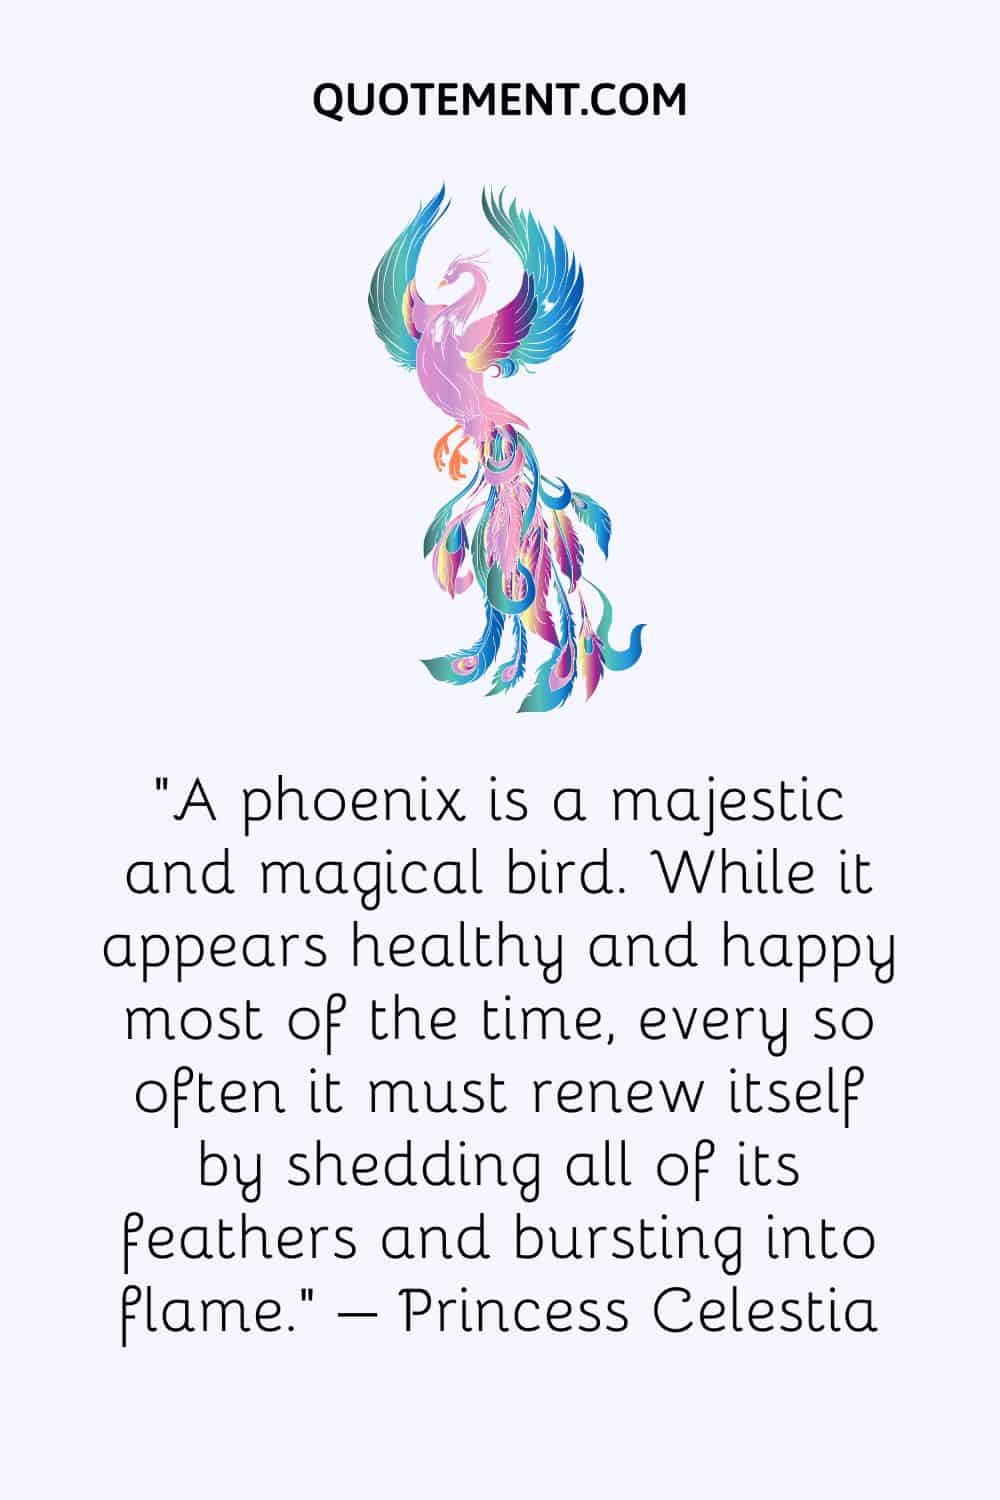 A phoenix is a majestic and magical bird